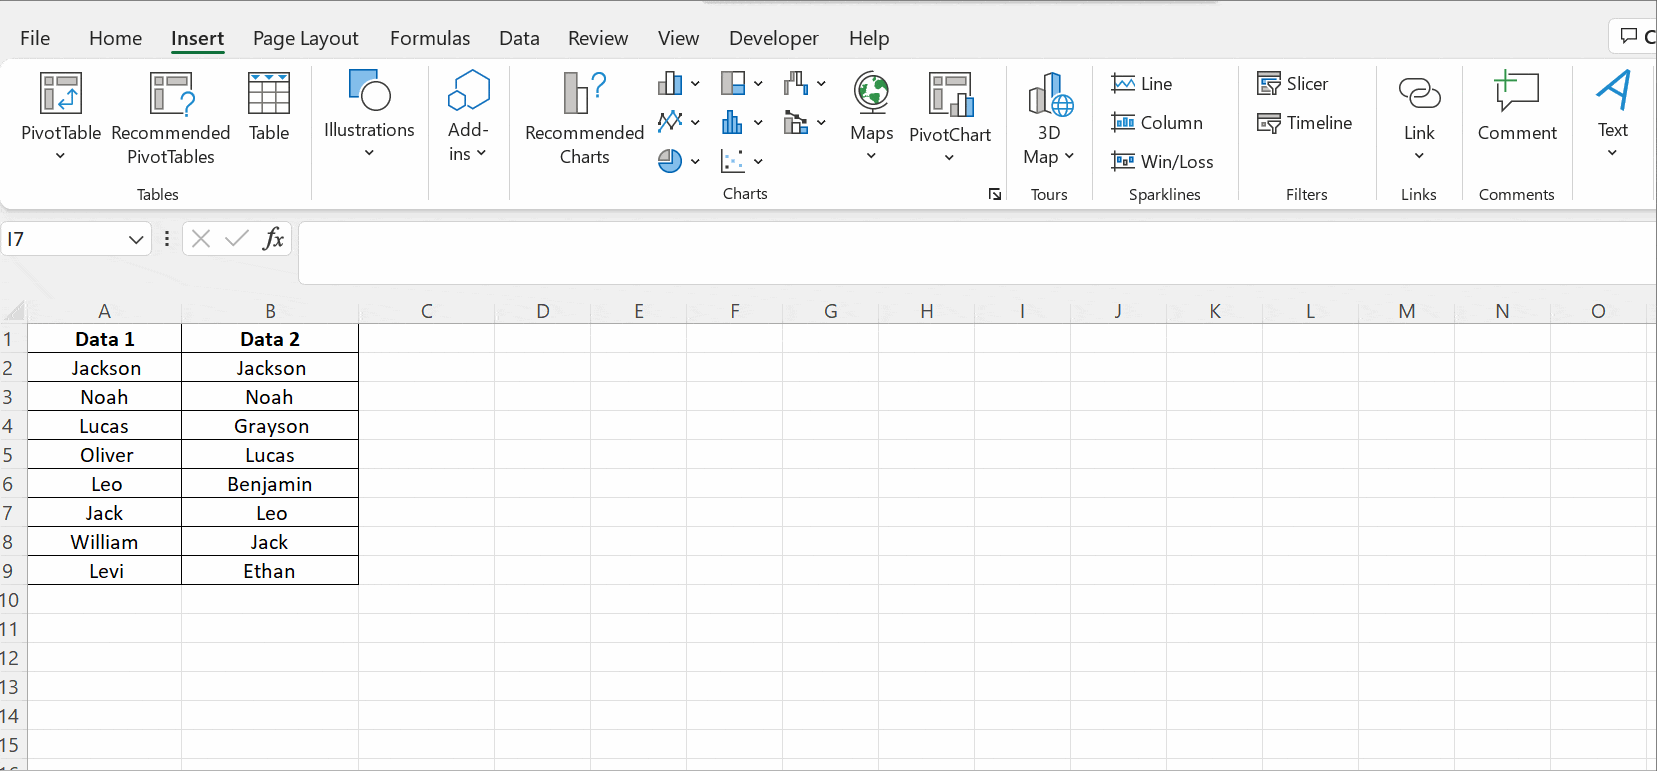 Custom Format. choose Unique from the drop-down list